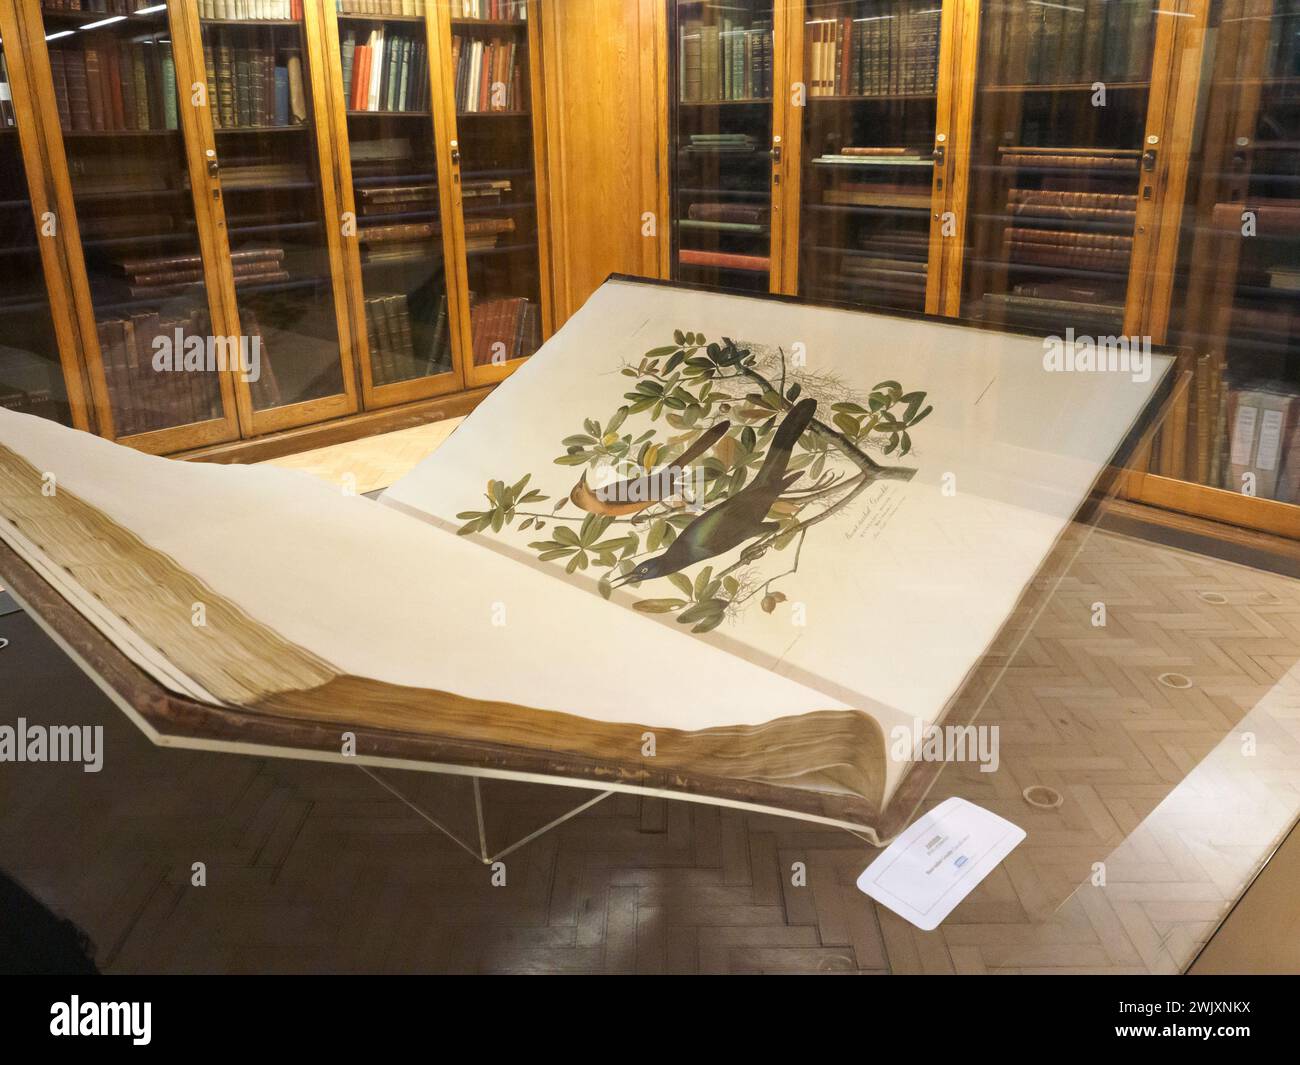 Audubon's The Birds of America on display in the Hornby Library Liverpool Stock Photo